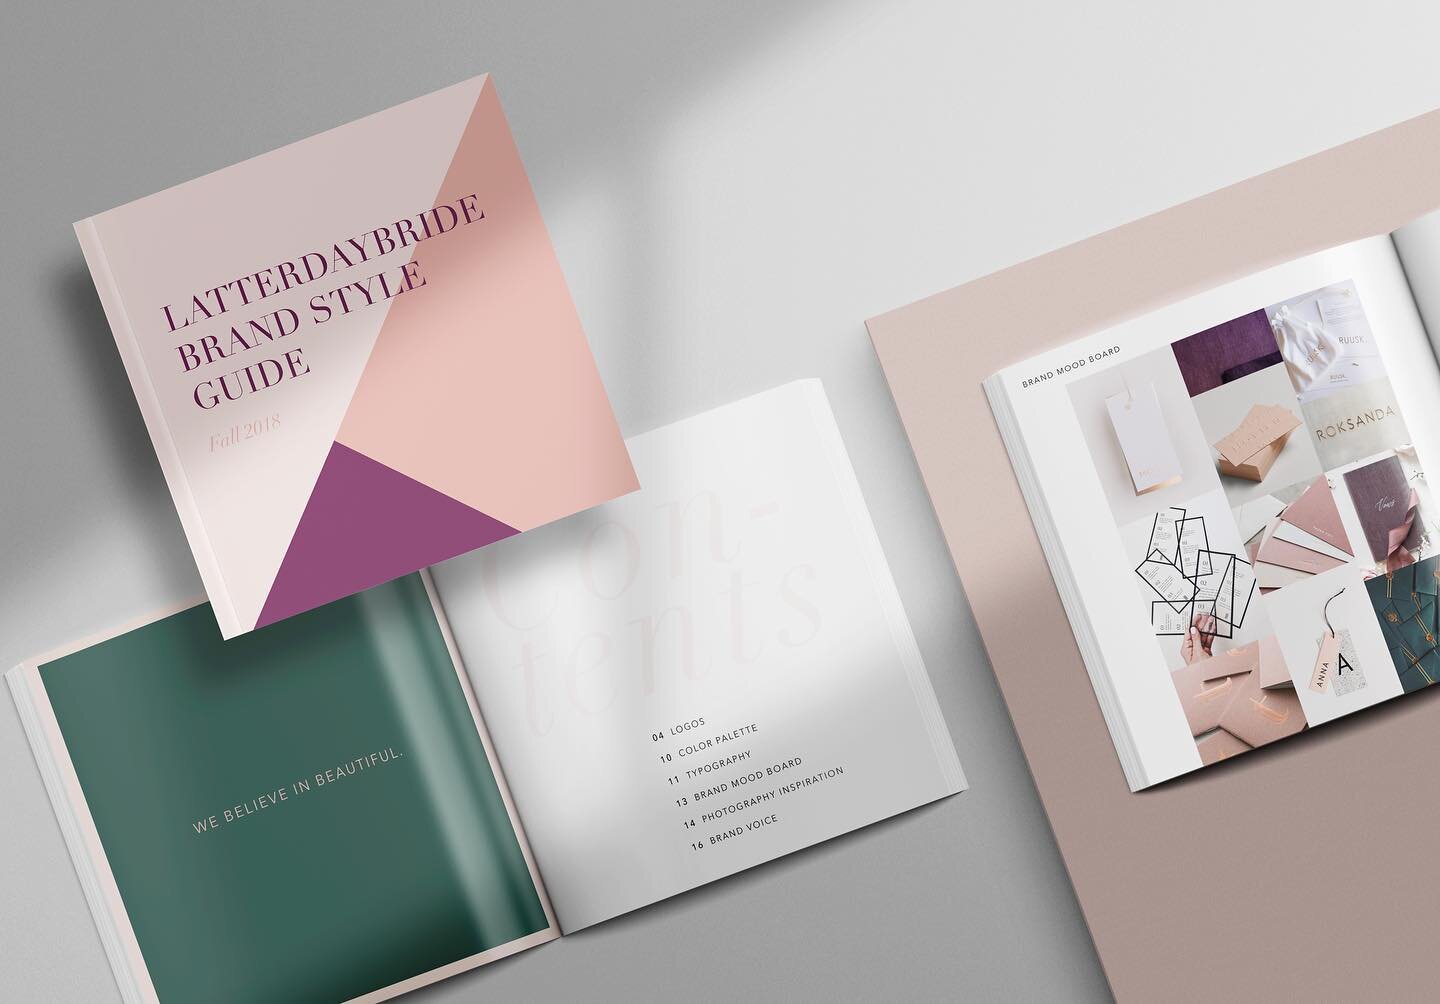 Brand Style Guide and more branded elements for @latterdaybride ✨

Services &mdash; Market Research, Brand Strategy, Brand Identity, Website Design and Development, Photo Shoot Creative Direction, and on-going Brand Consulting

Team &mdash; @danielle